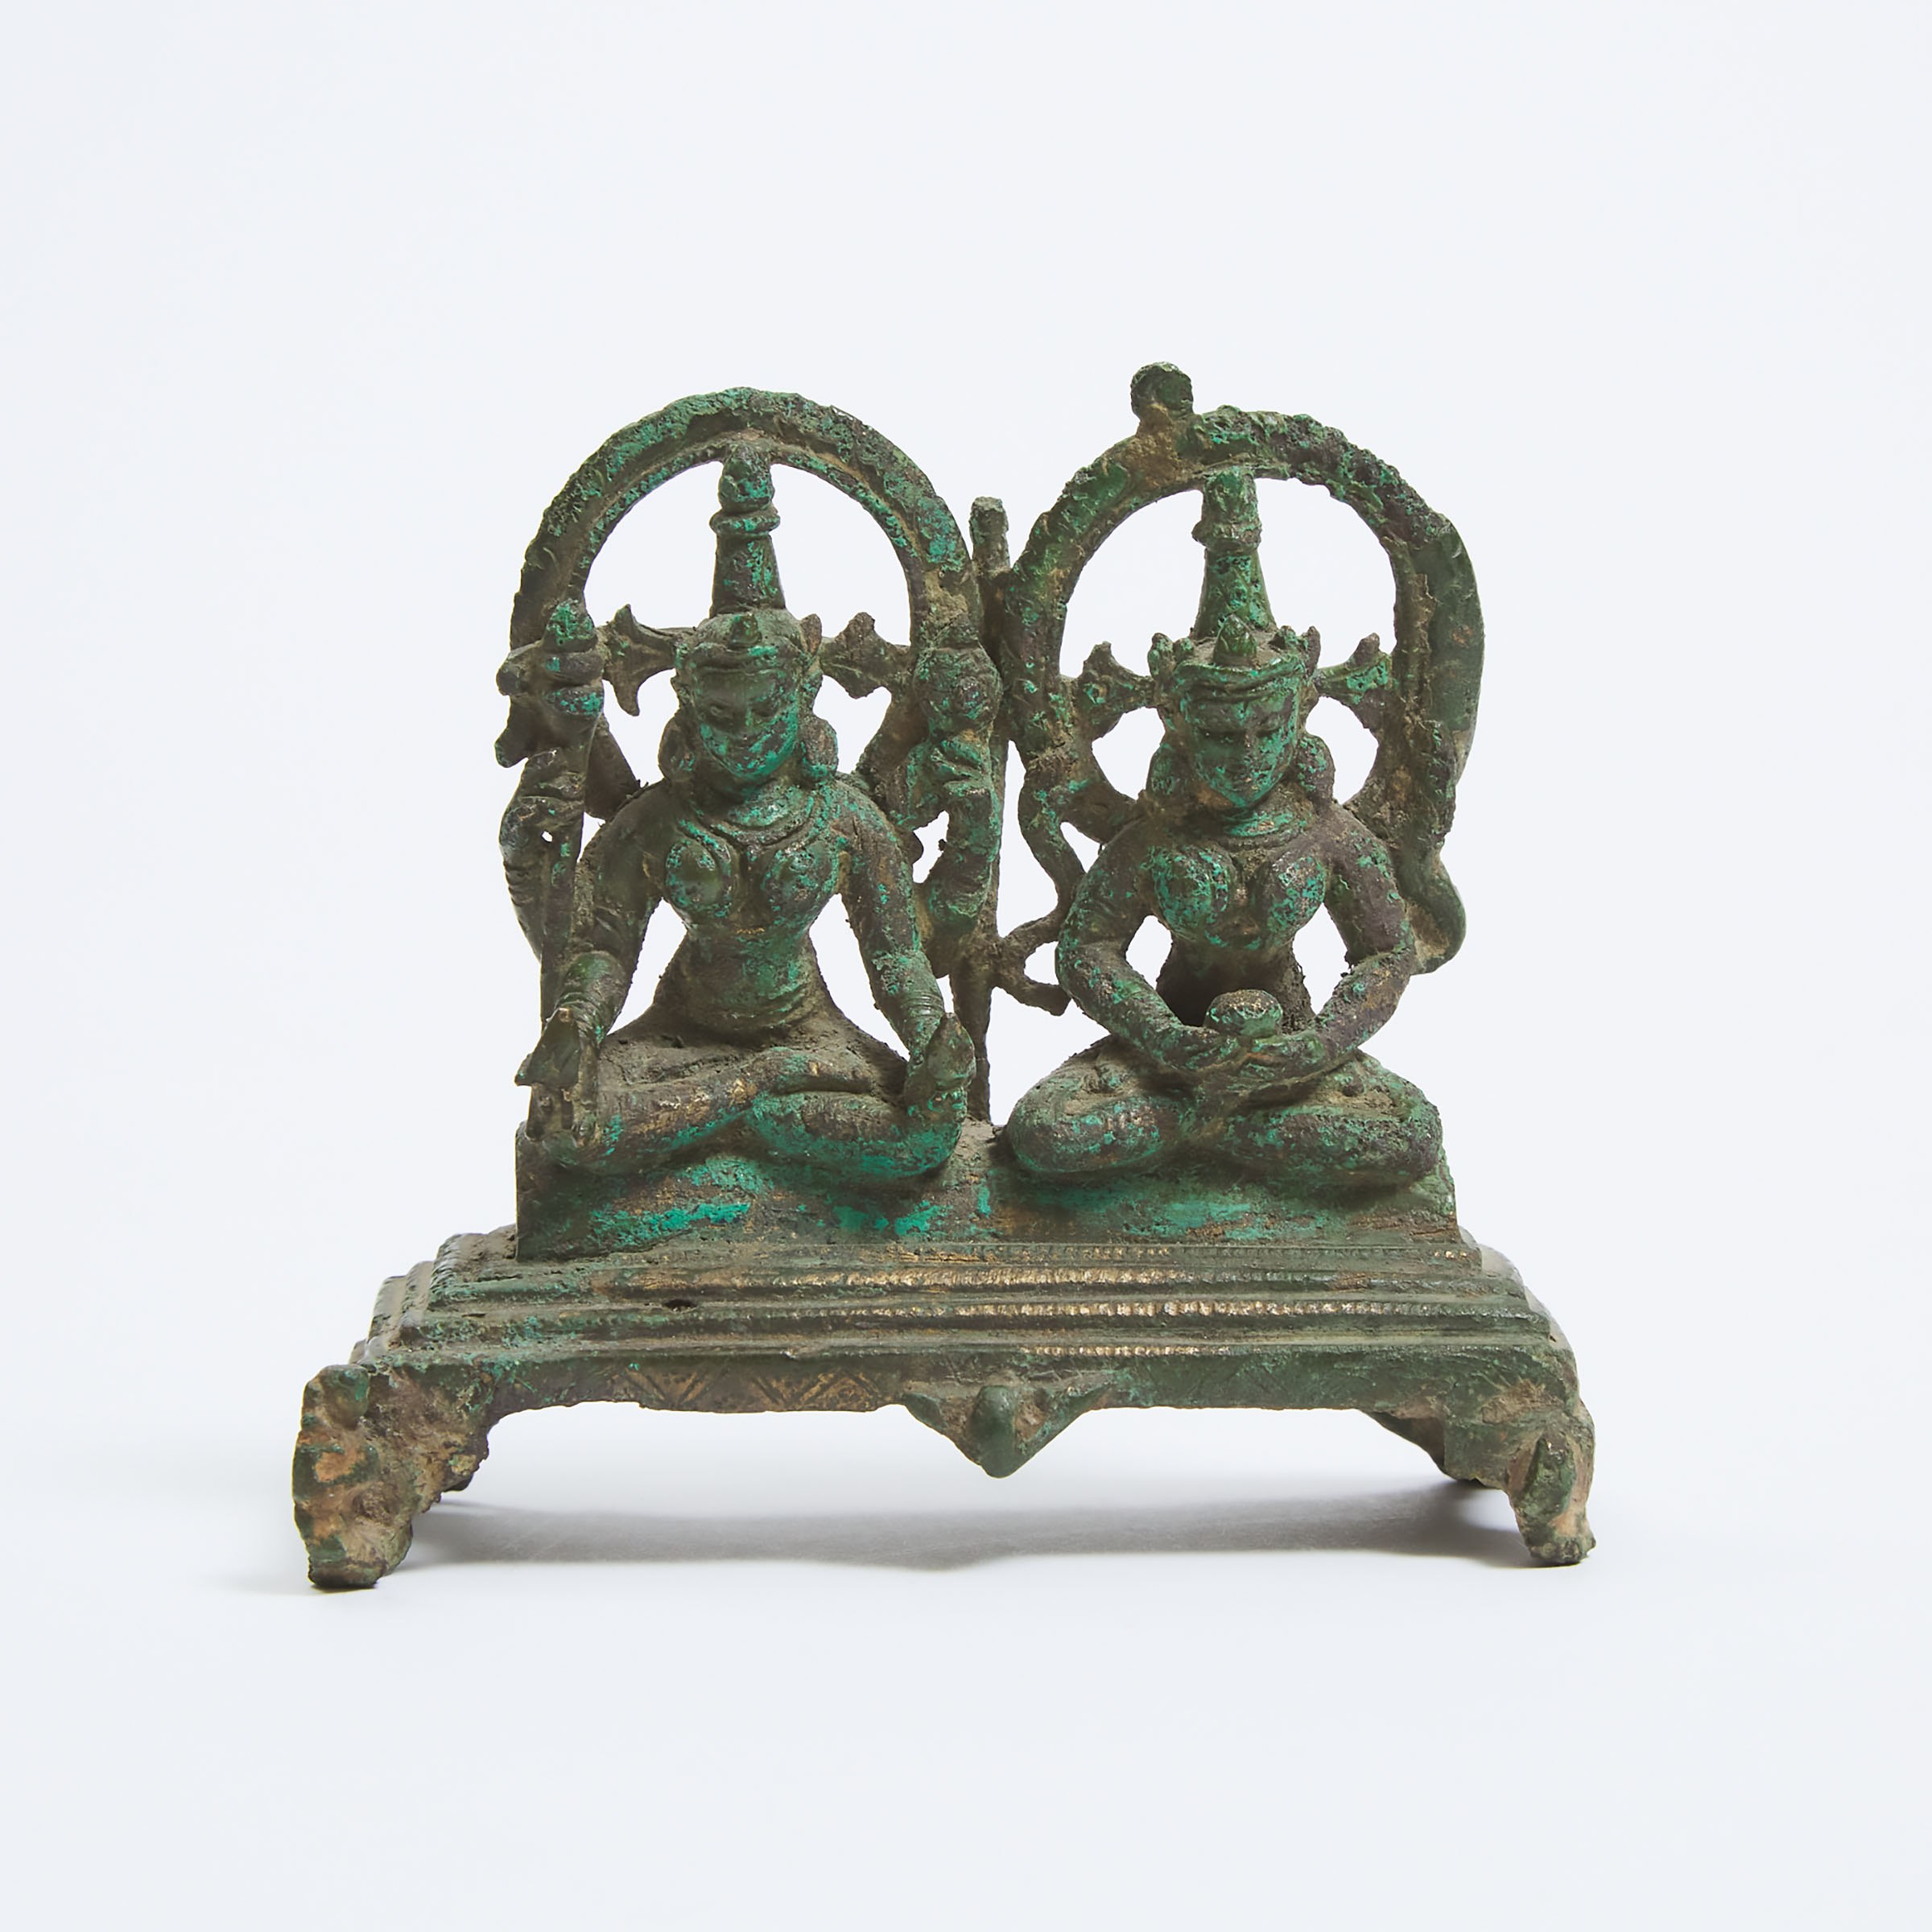 An Indian Gilt Bronze Group of Two Mother Goddesses Devanagari Inscription, Pala Period, 10th-12th Century